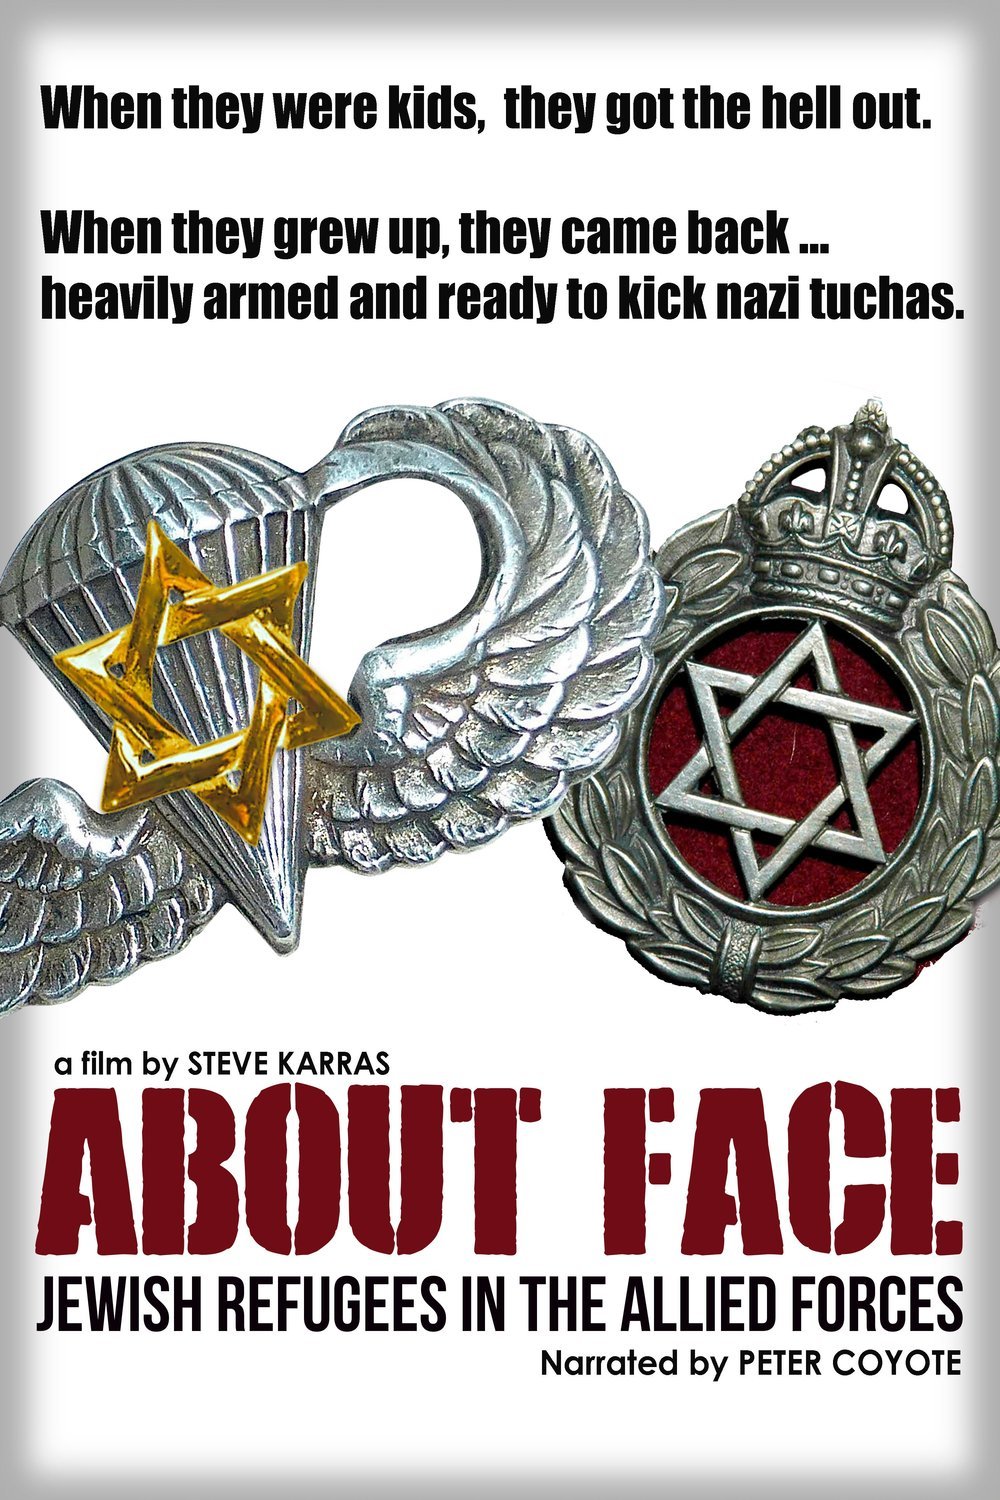 Poster of the movie About Face: The Story of the Jewish Refugee Soldiers of World War II